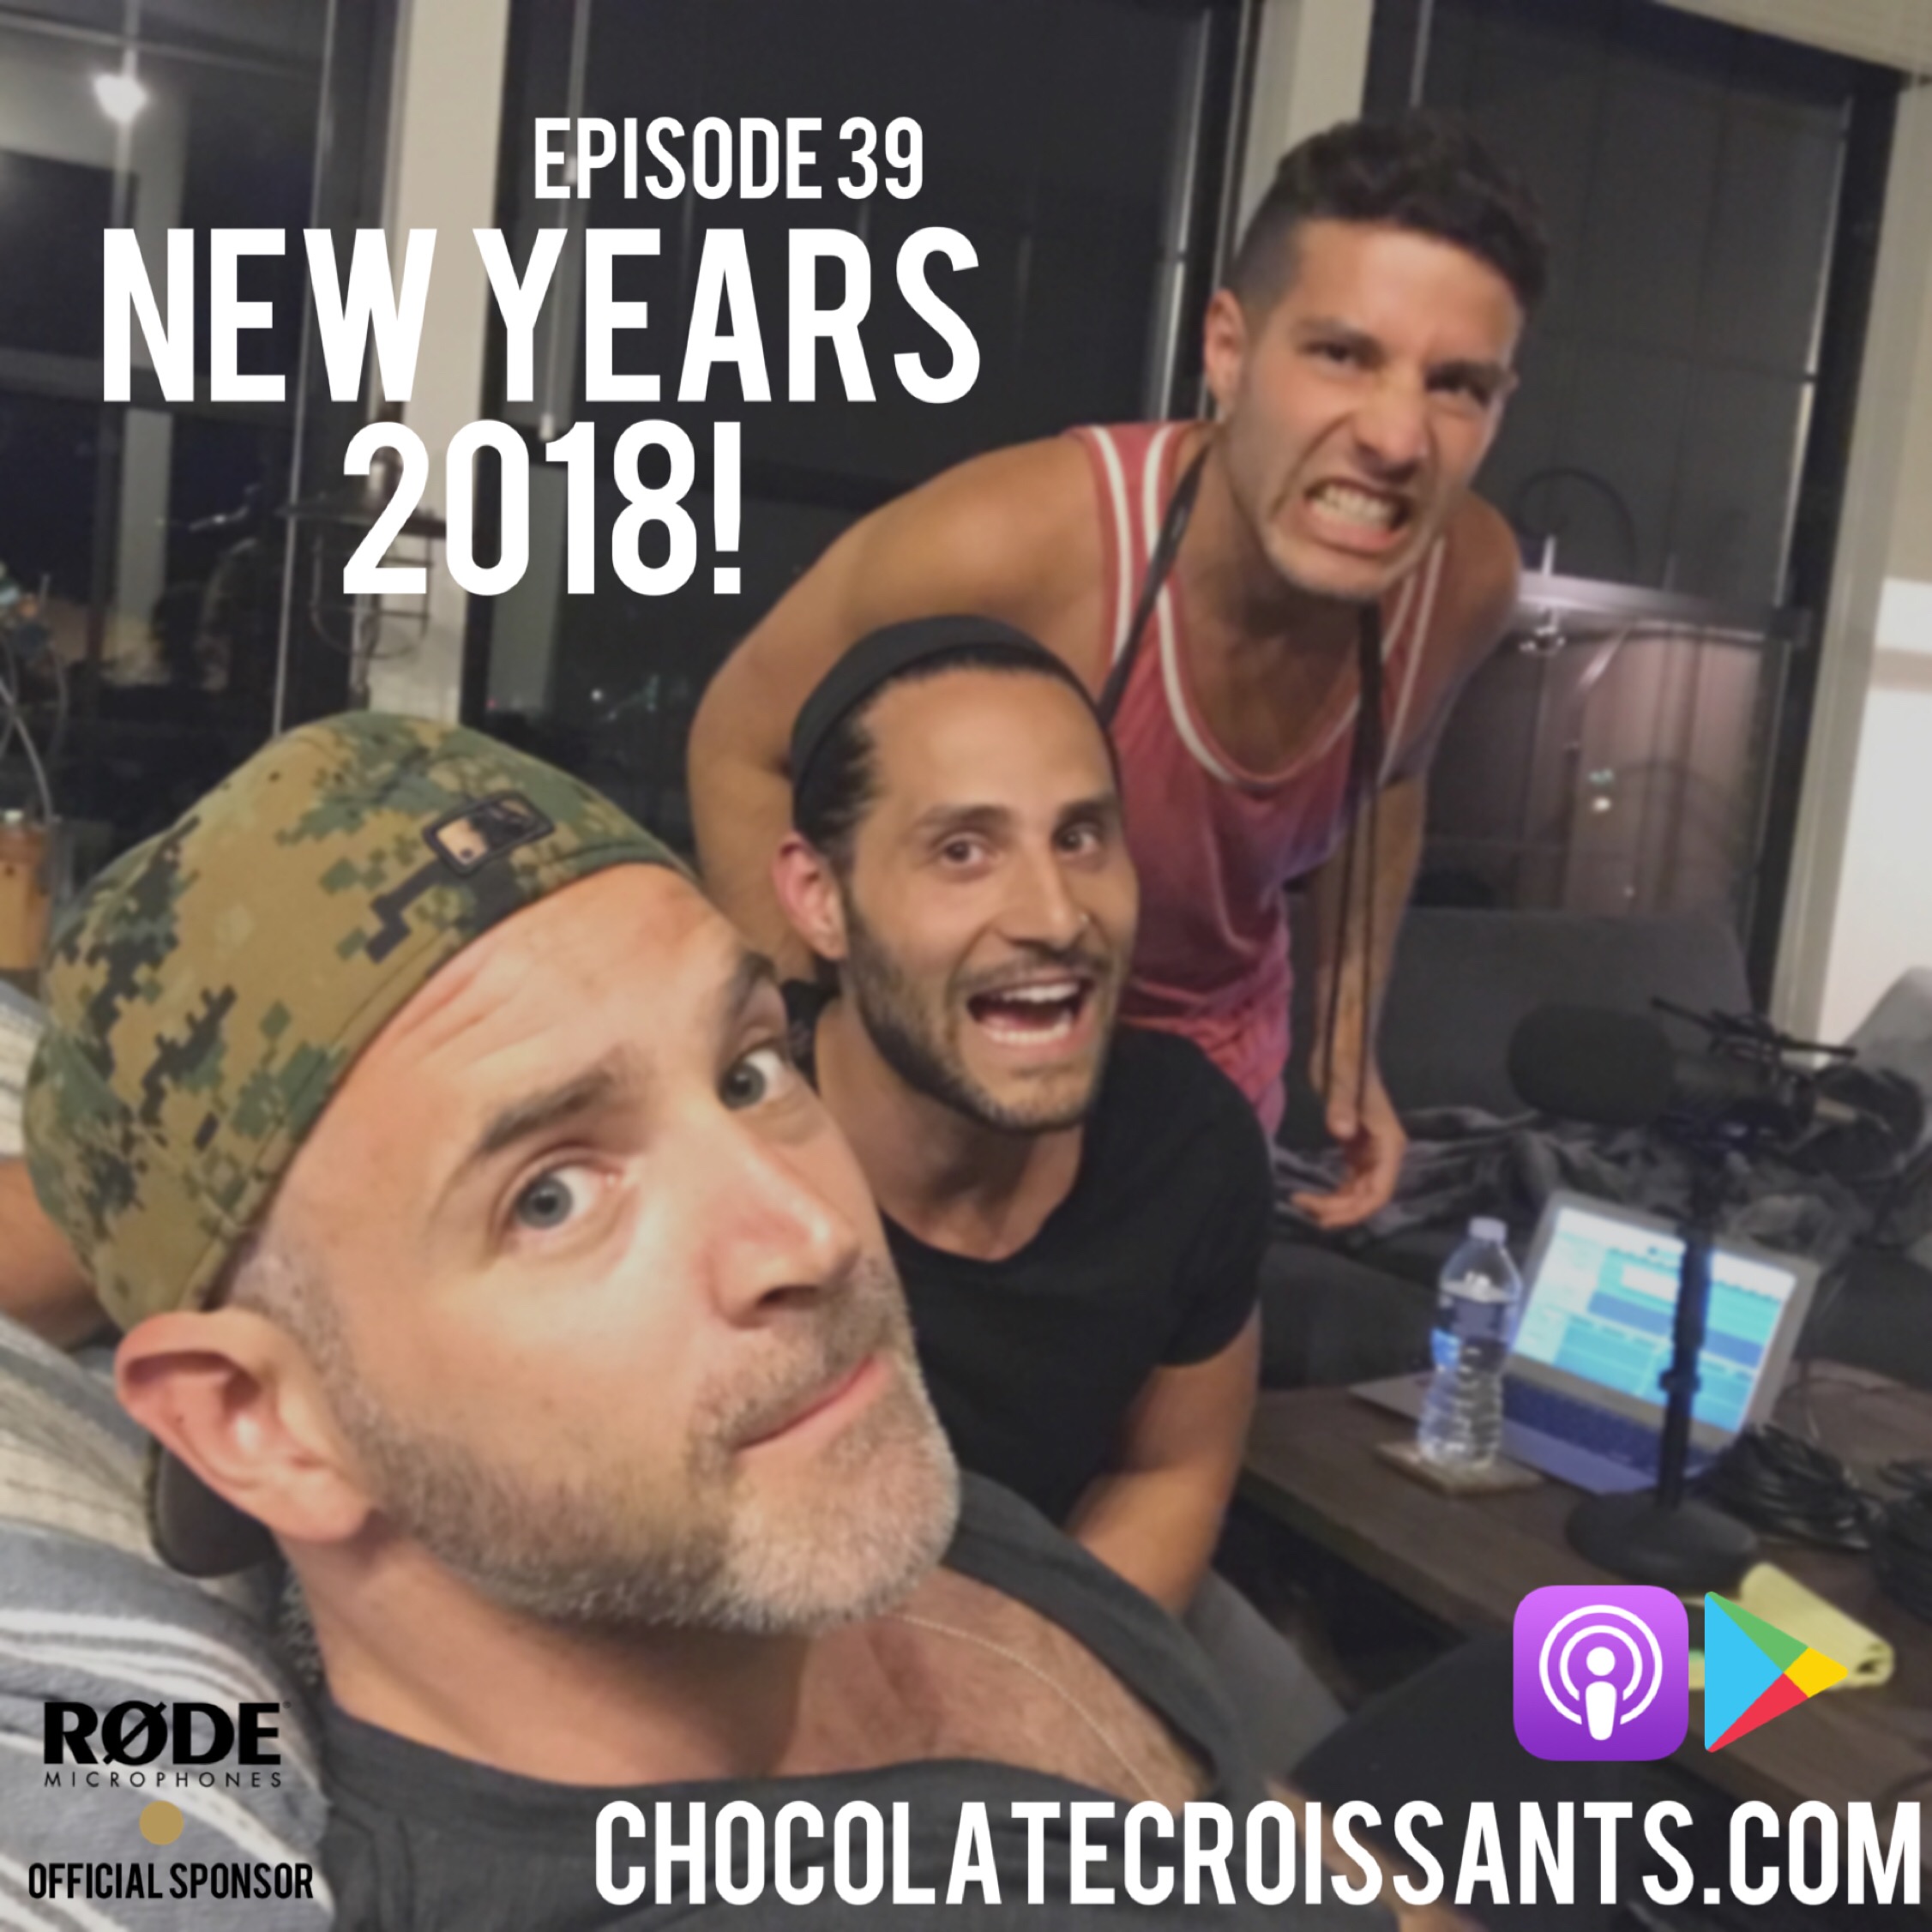 Episode 39: New Years 2018!